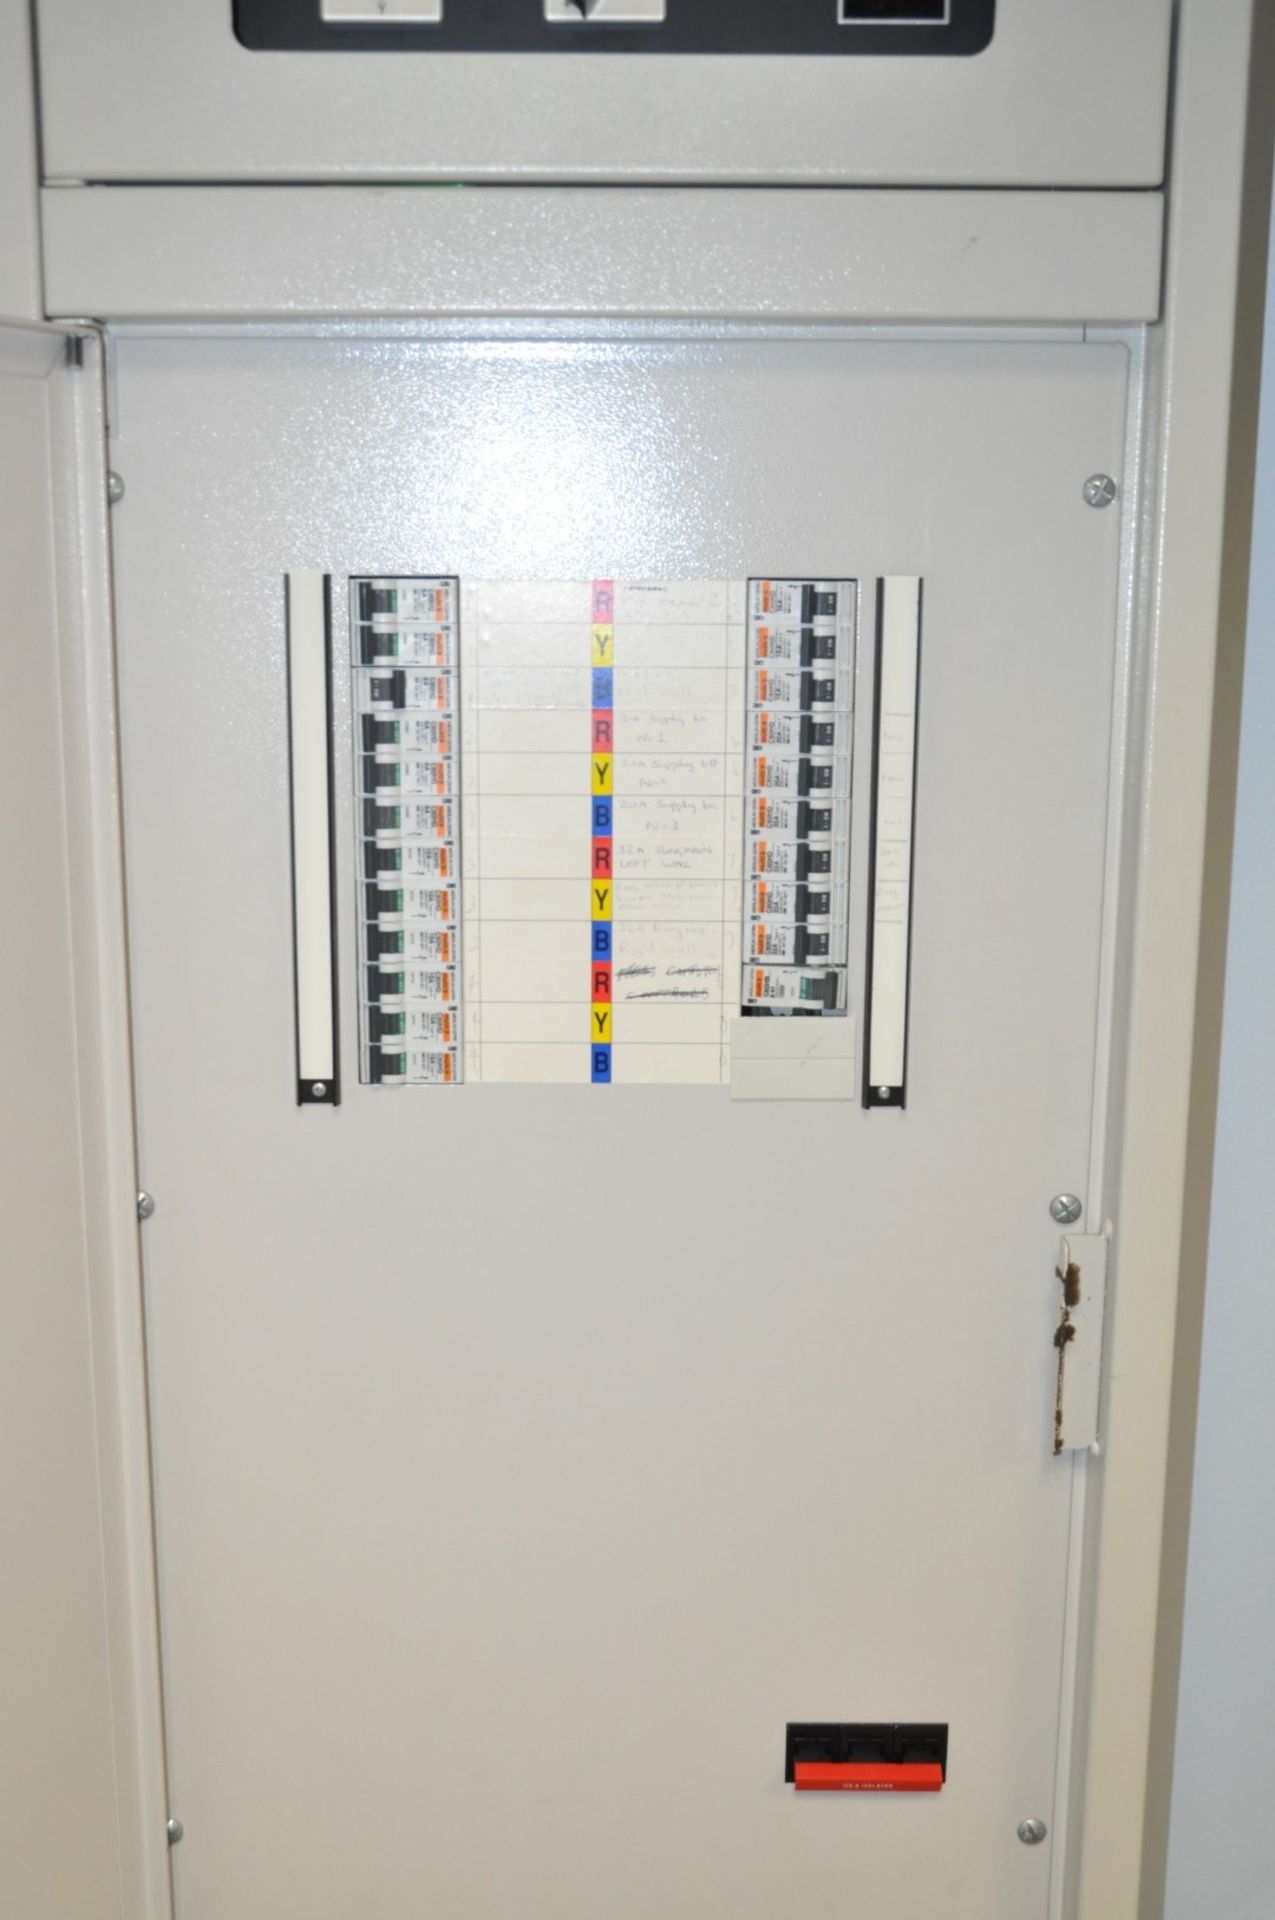 1 x Mardix Power Distribution Unit Cabinet - PDU ADC5 - 163 x 50 cms - Ref L57 1F - Buyer to - Image 4 of 4